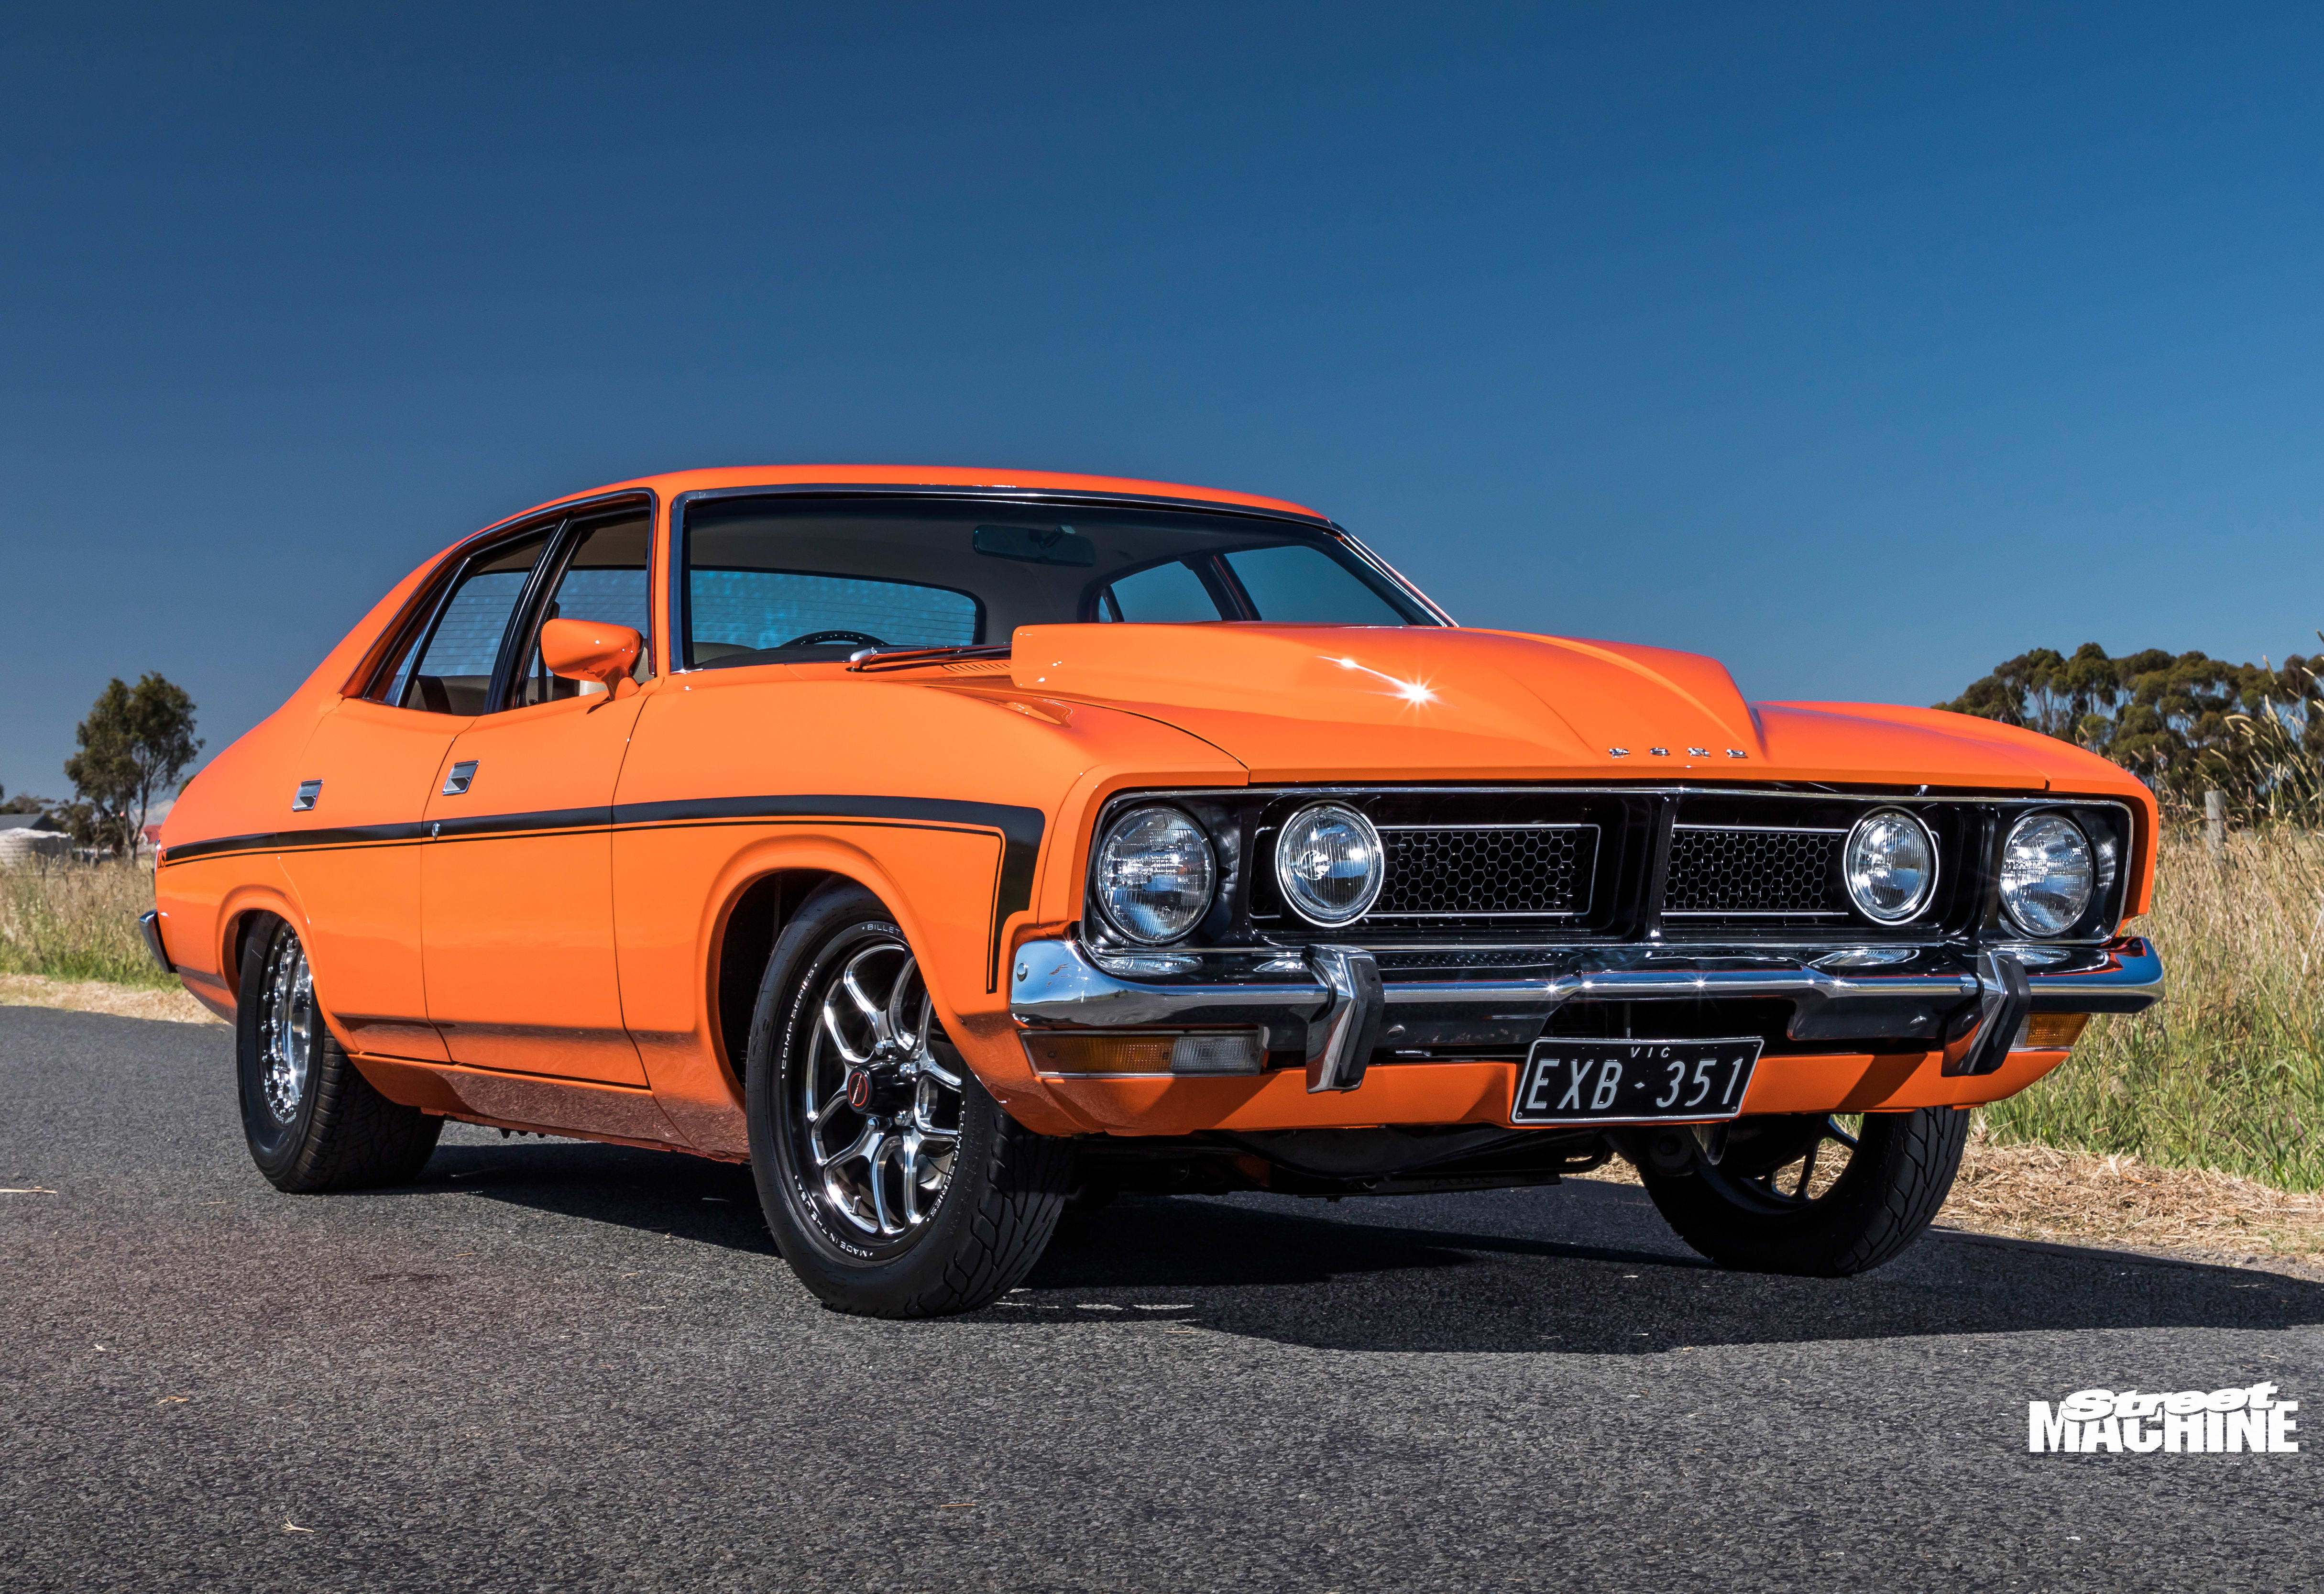 Ford Falcon 500 Wallpapers